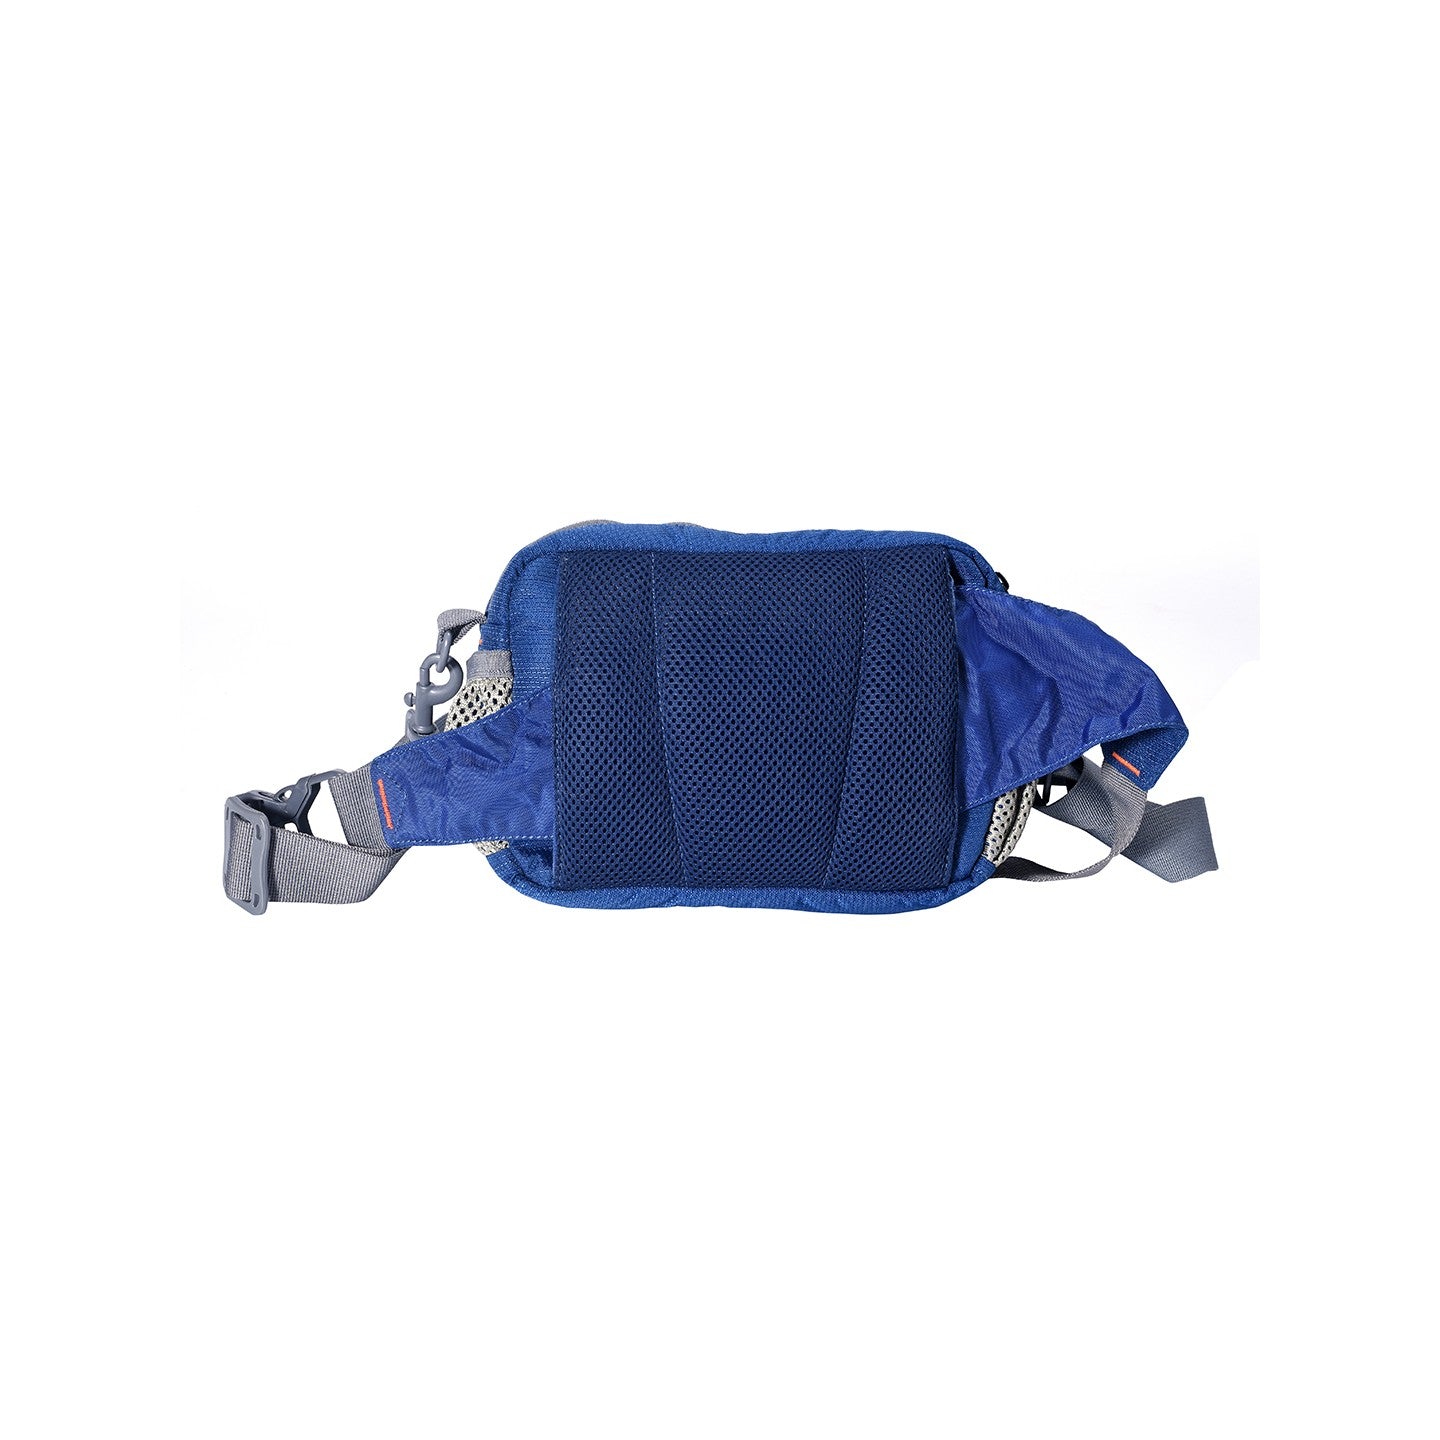 Image: Back view of the P27 Organiser sling cum waist bag, highlighting its ergonomic design and the hidden waist belt concealed behind the air mesh panel. The bag's padded back panel and breathable materials provide comfort and ventilation, ensuring a pleasant wearing experience during prolonged usage. Stay organized and carry your photography accessories with ease using this versatile and functional bag.